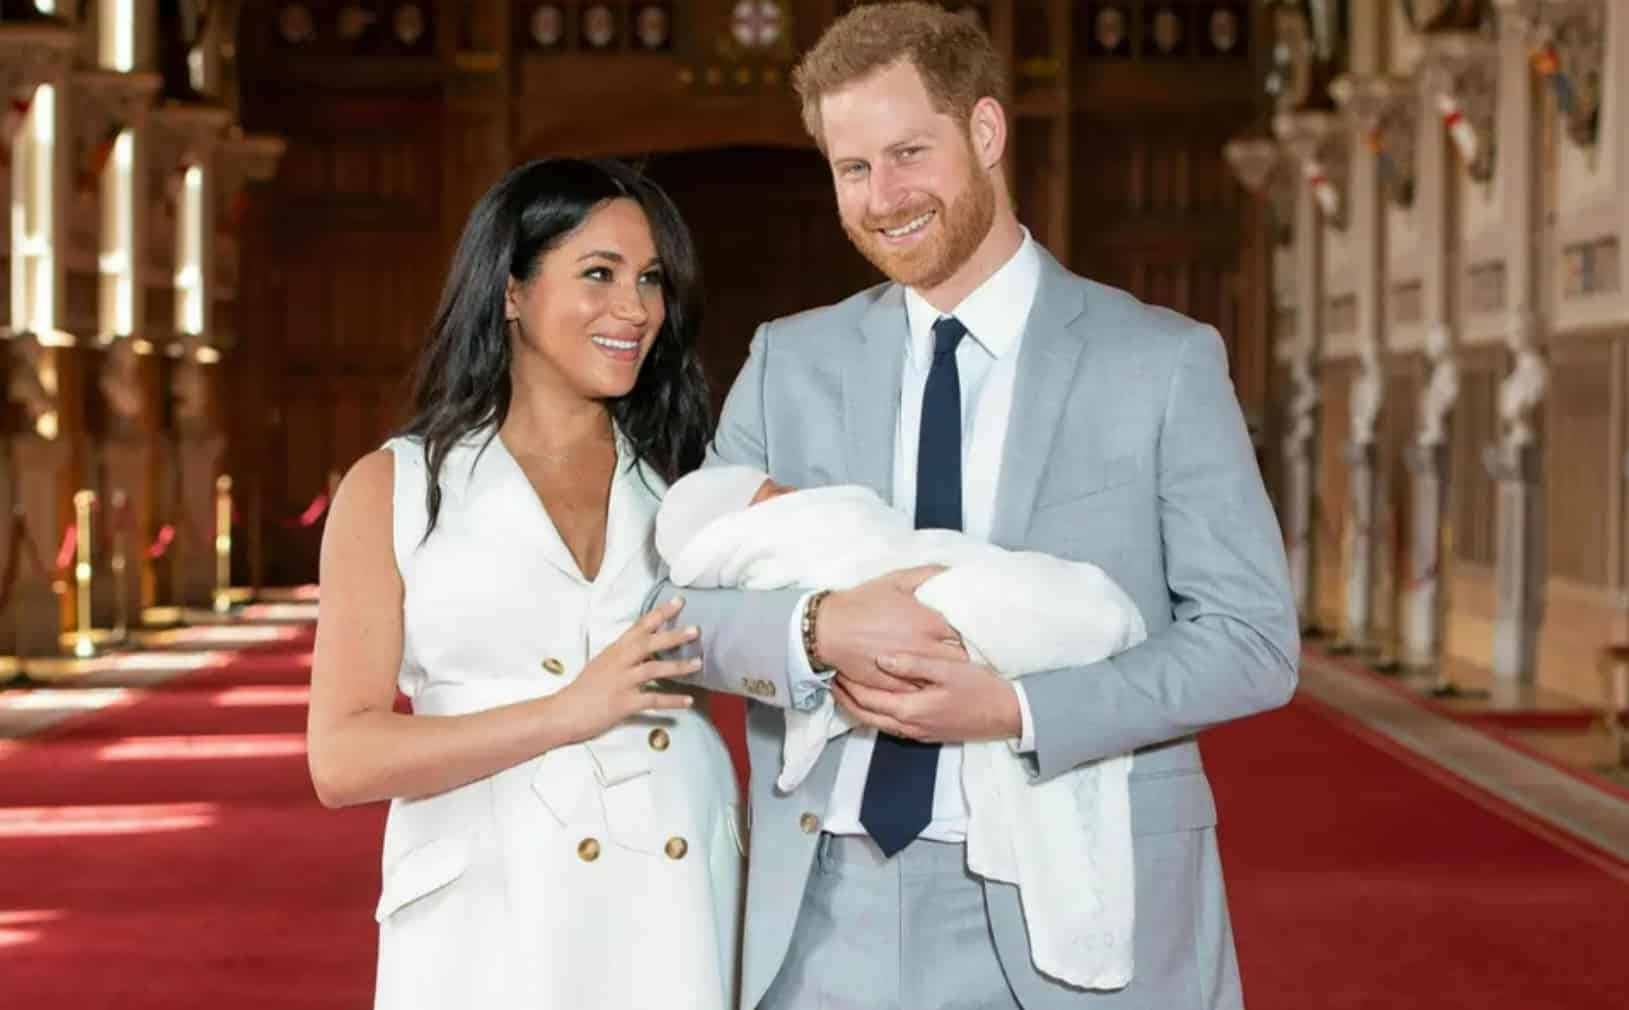 Prince Harry and Meghan Markle Welcome Baby Girl Lili as Their Second Child